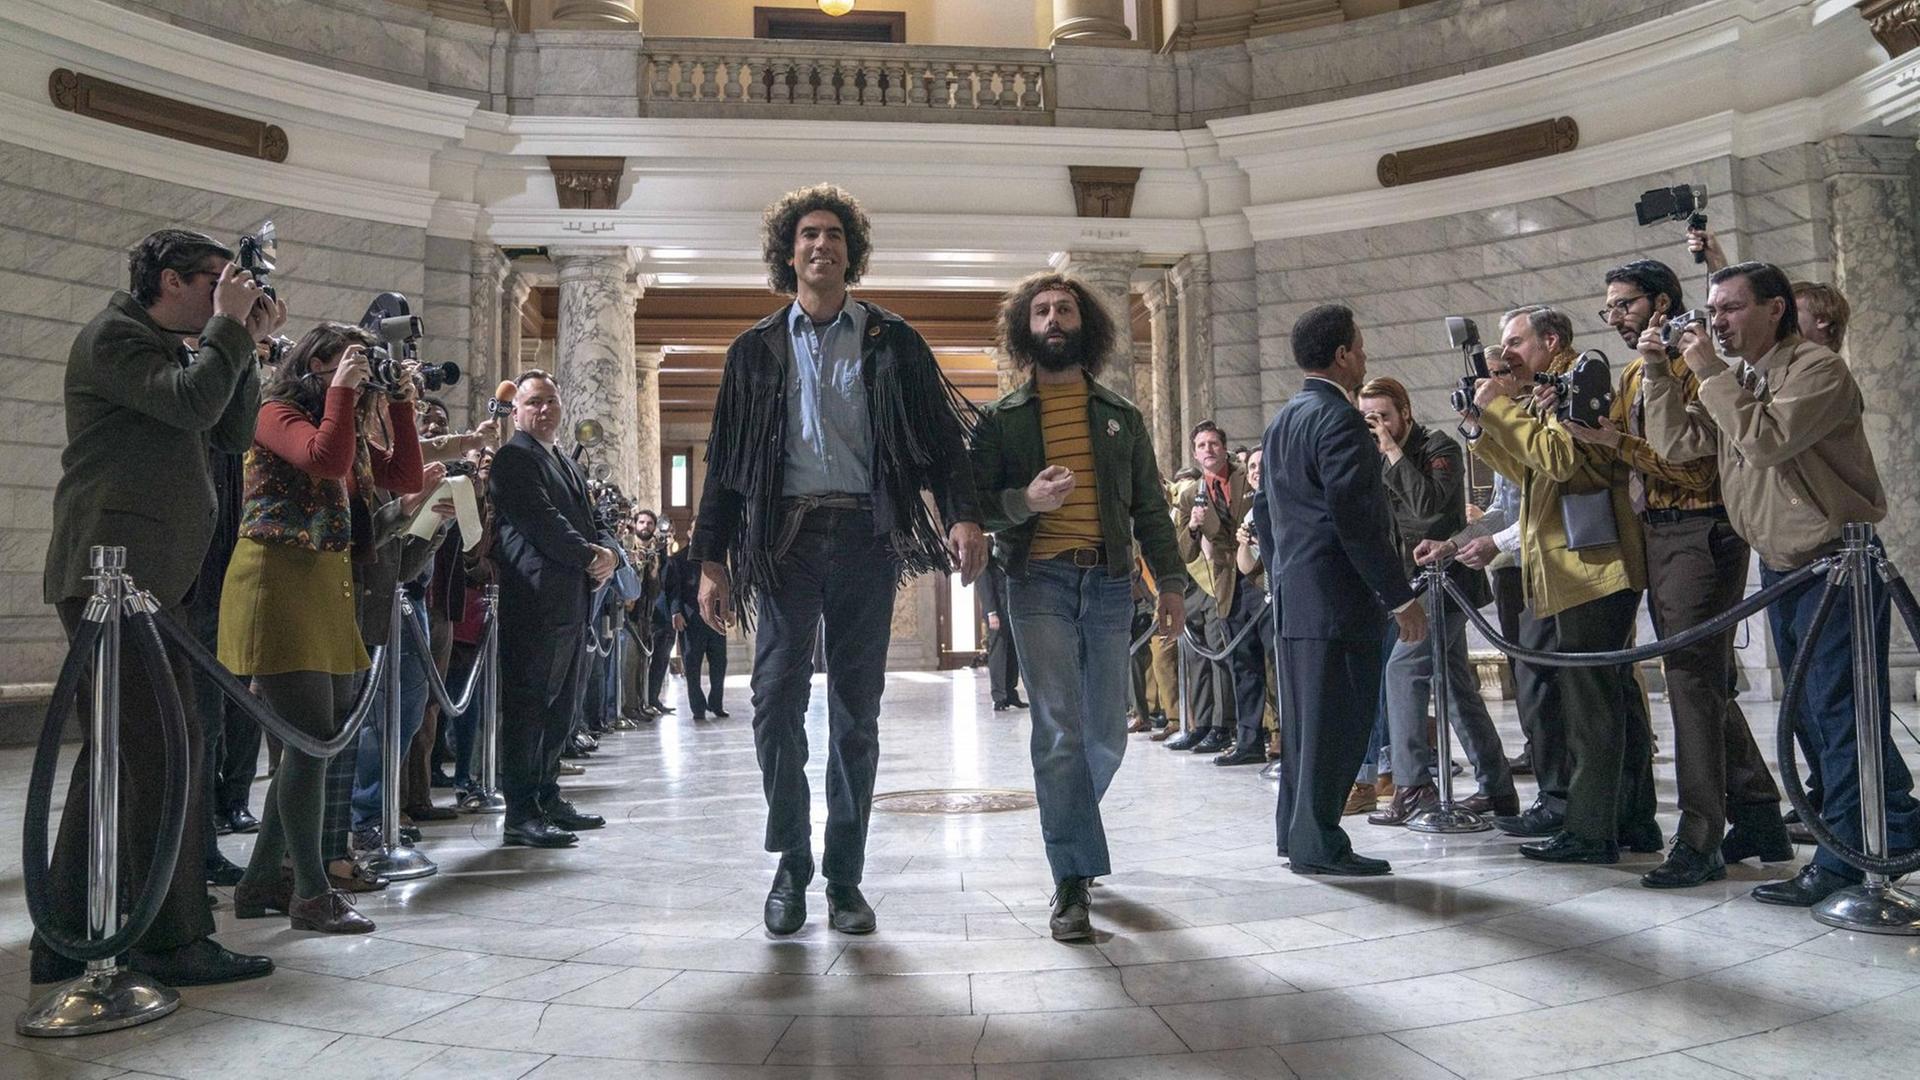 Sacha Baron Cohen als Abbie Hoffmann (links) und Jeremy Strong als Jerry Rubin in dem Film "The Trial of the Chicago 7"